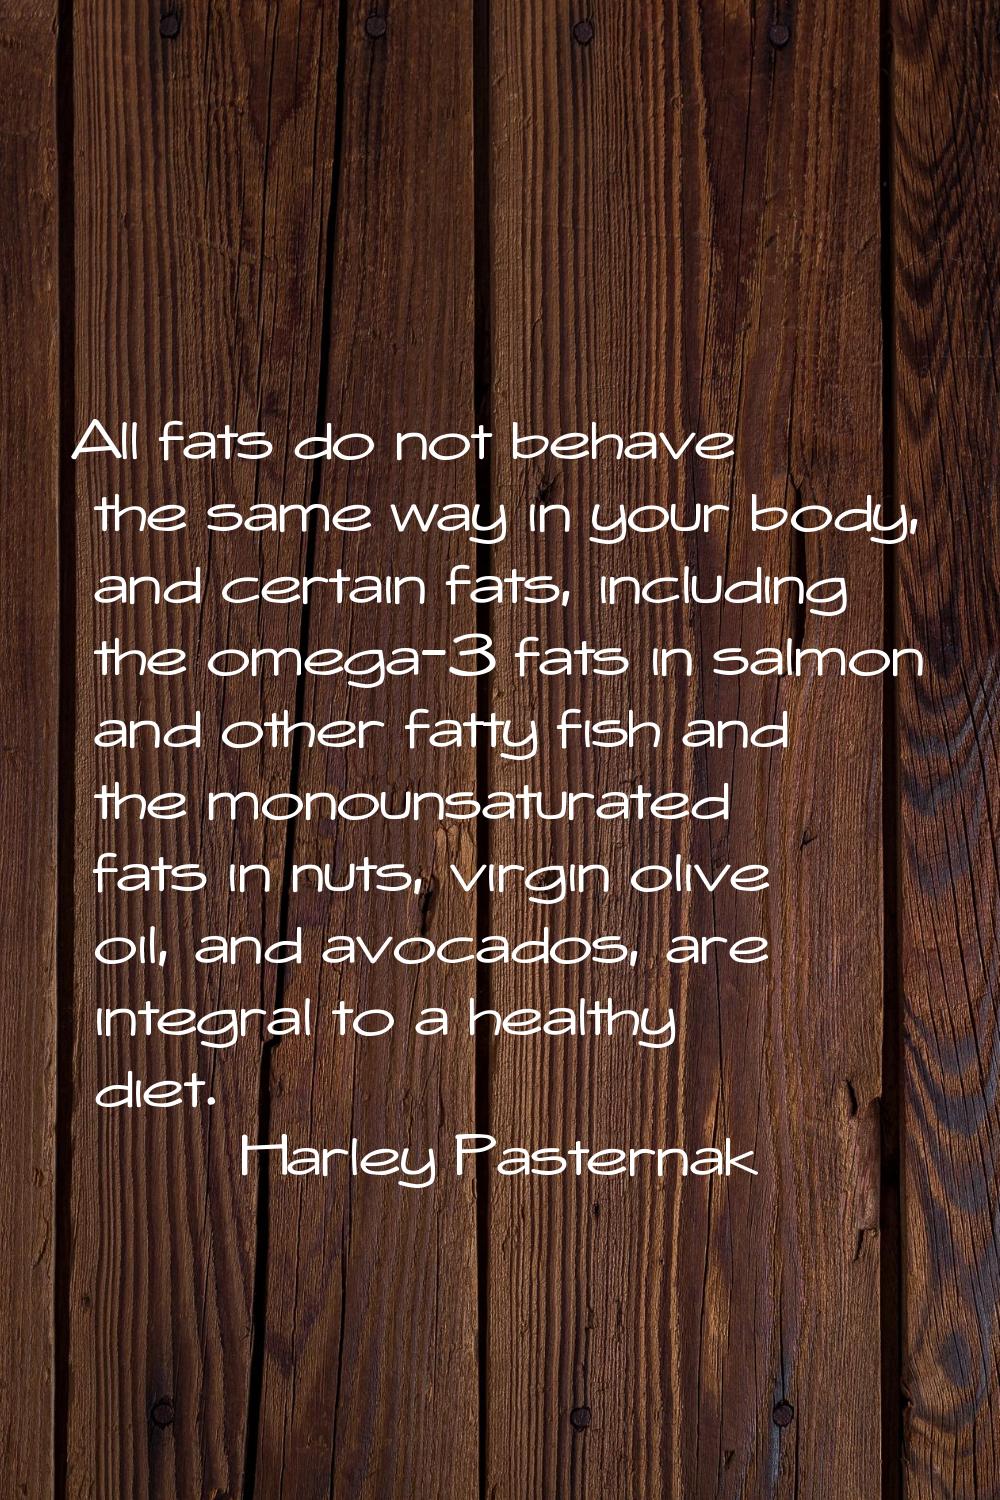 All fats do not behave the same way in your body, and certain fats, including the omega-3 fats in s